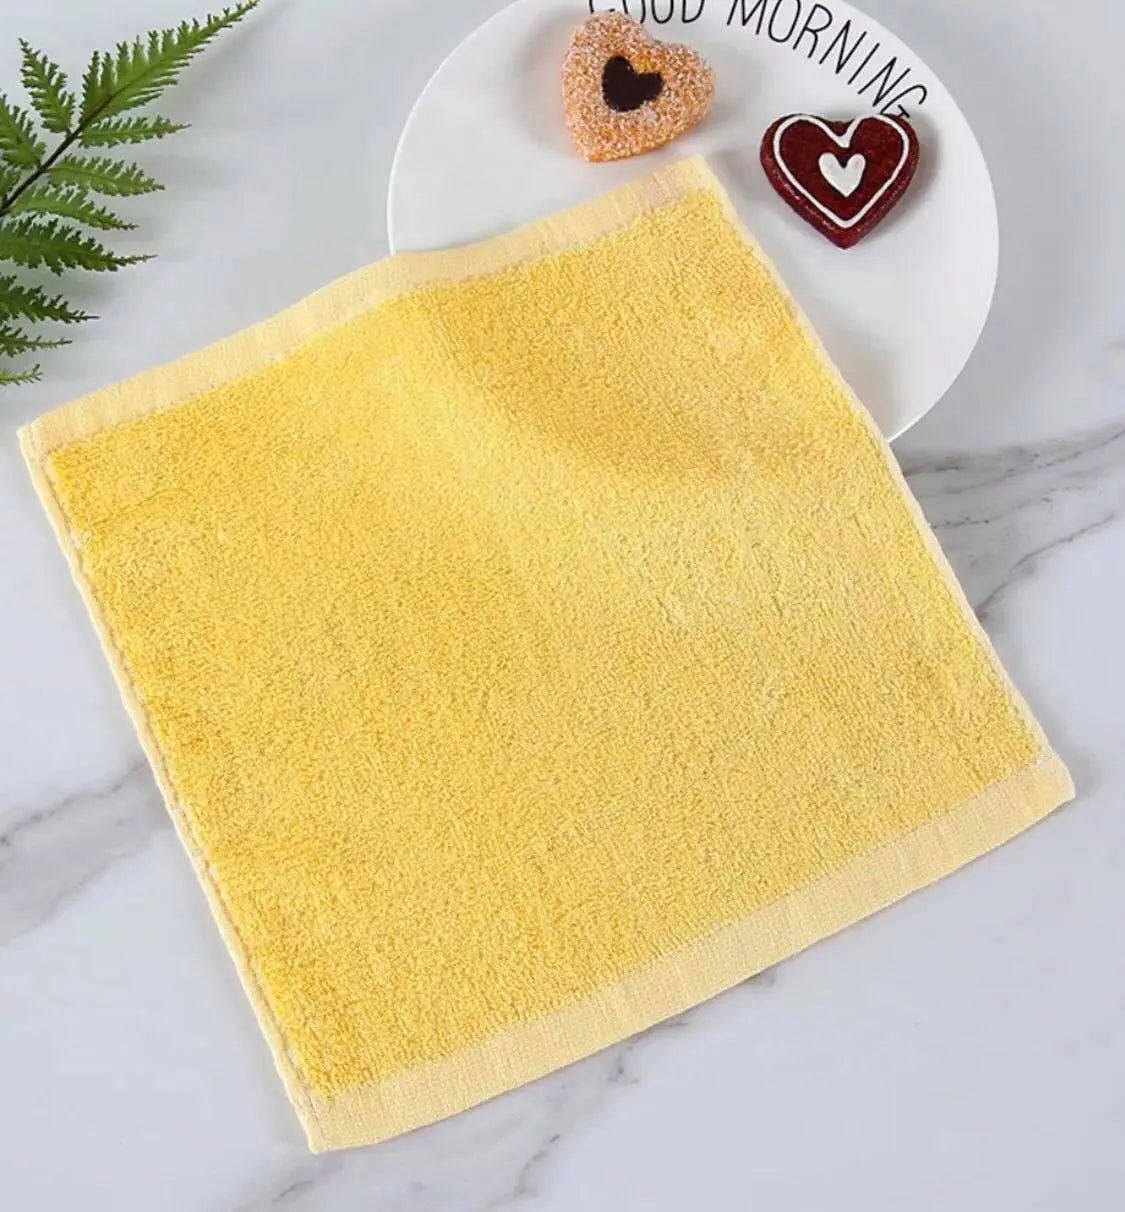 2 X BAMBOO FIBER SQUARE SMALL HAND TOWEL FACE TOWEL SOFT COOL COMFORTABLE everythingbamboo